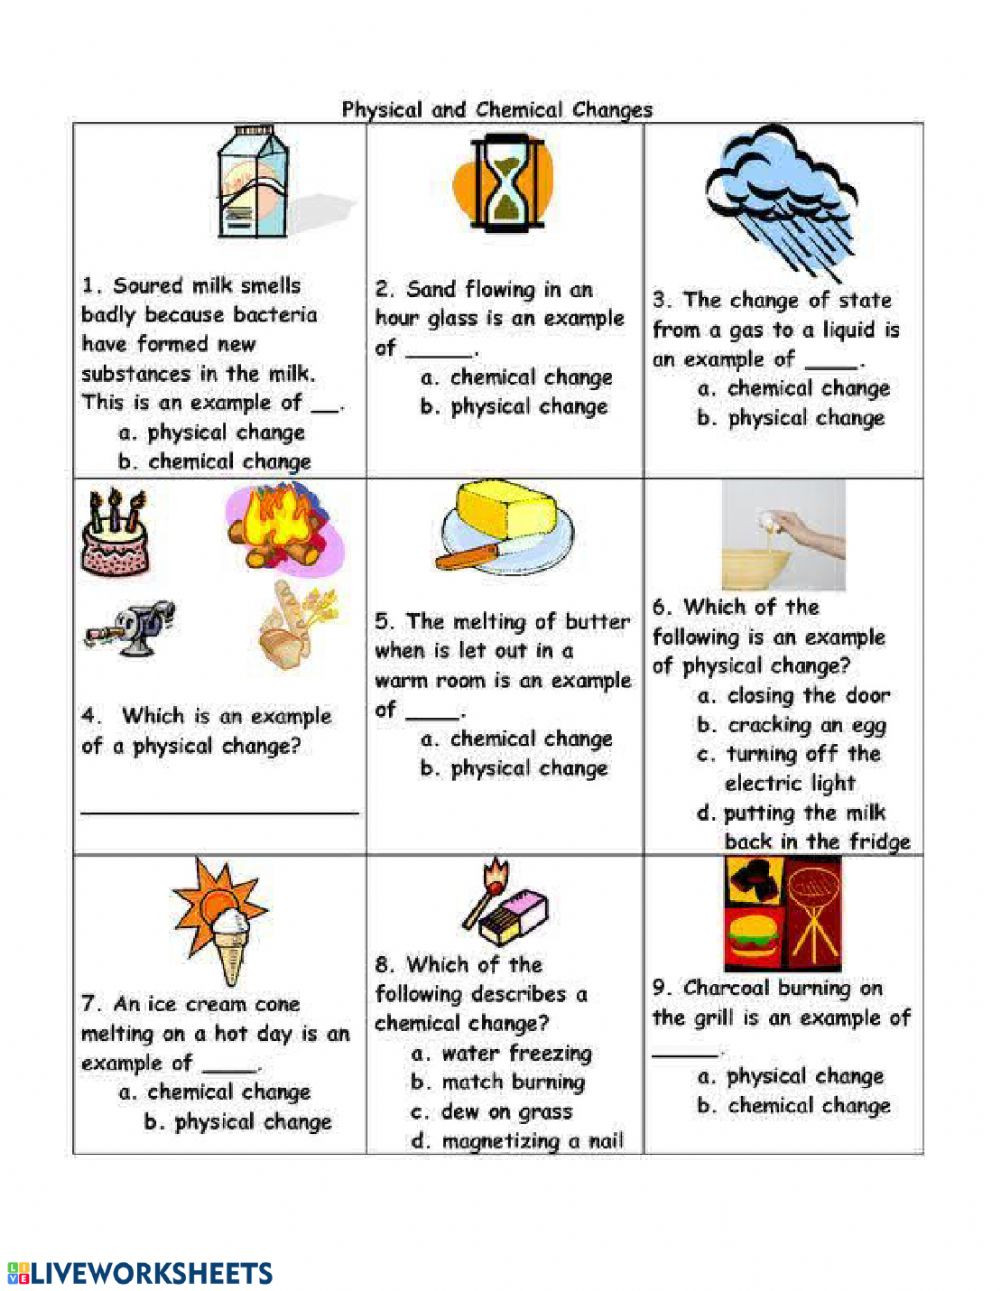 Physical Vs Chemical Changes Worksheet Physical and Chemical Changes Interactive Worksheet